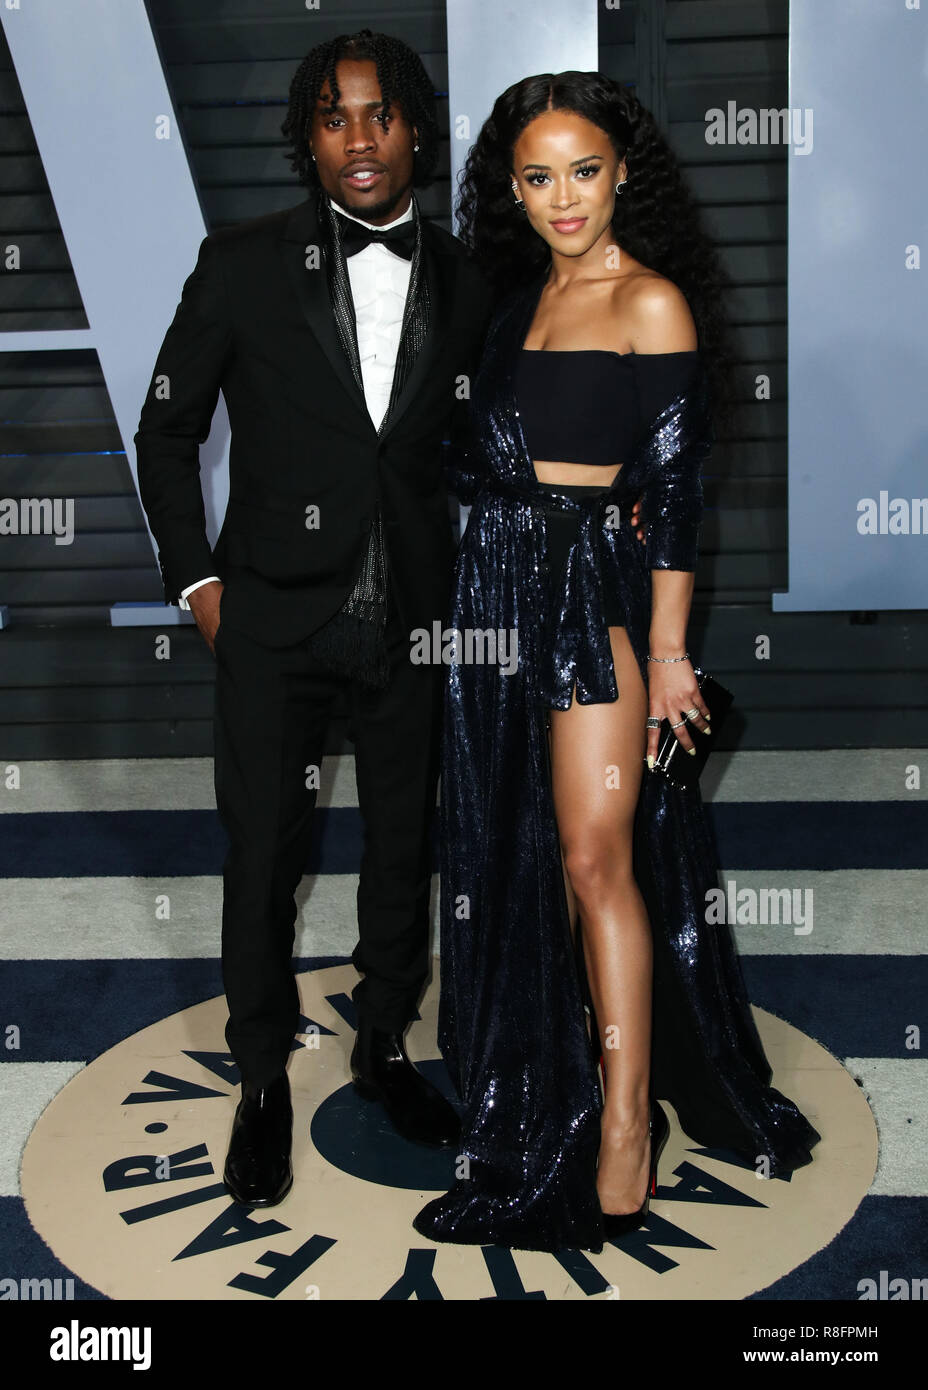 BEVERLY HILLS, LOS ANGELES, CA, USA - MARCH 04: Shameik Moore, Serayah McNeill at the 2018 Vanity Fair Oscar Party held at the Wallis Annenberg Center for the Performing Arts on March 4, 2018 in Beverly Hills, Los Angeles, California, United States. (Photo by Xavier Collin/Image Press Agency) Stock Photo